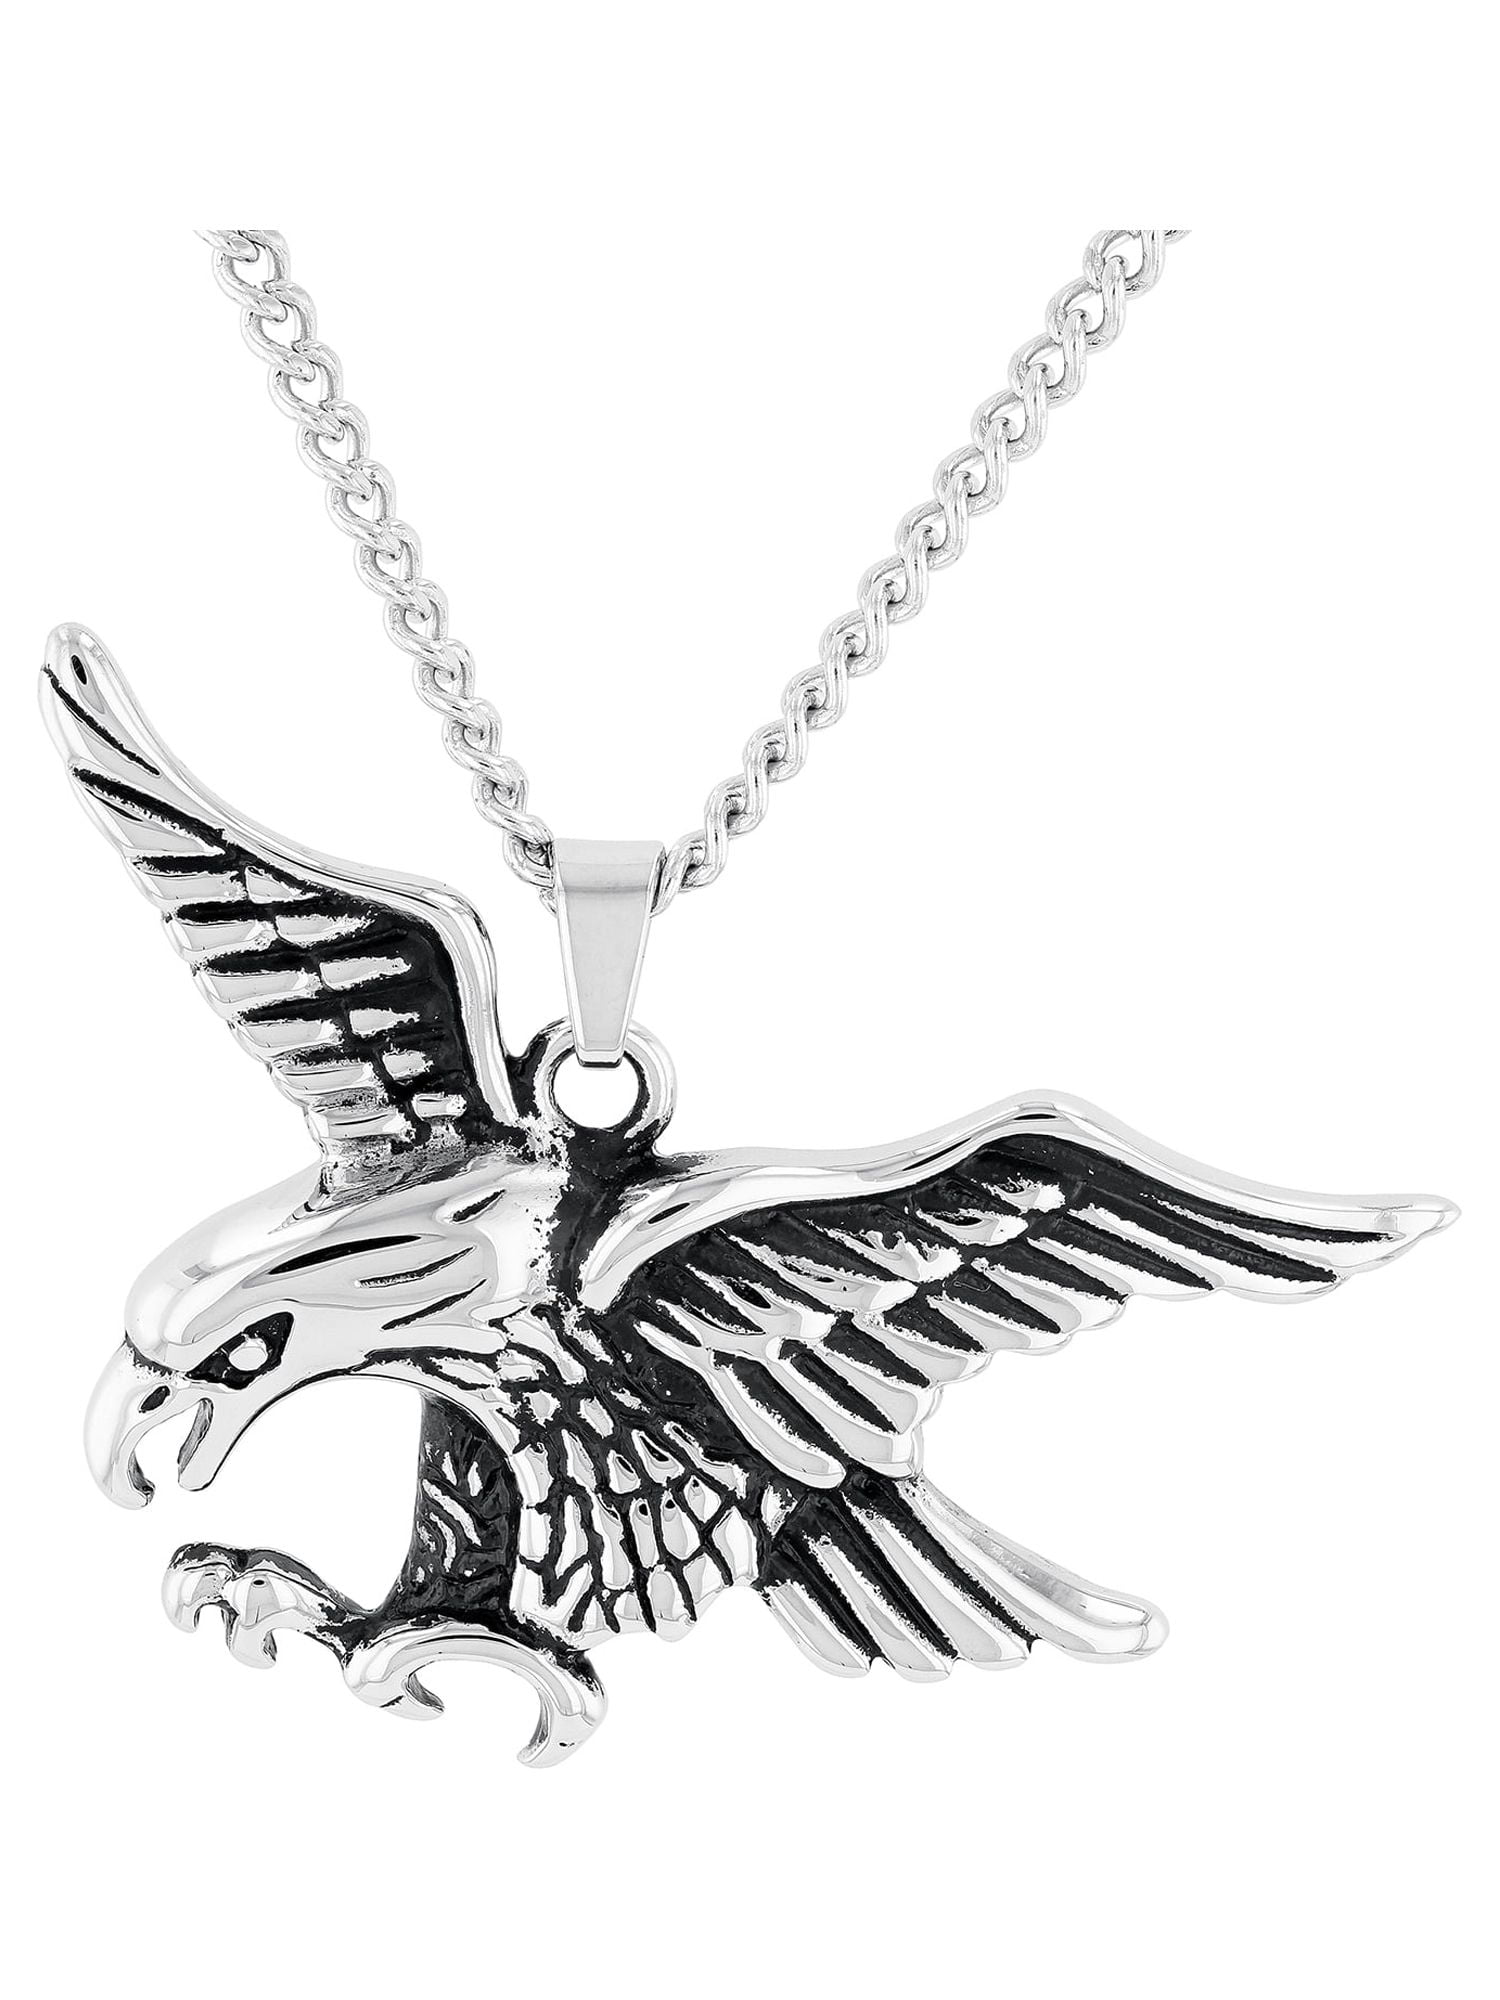 Stainless Steel Hunting Eagle Pendant Necklace ecfbe872 e903 4edd 86af 88a0fcb64059.04b8d6567b3808e61846b12ba1048bf2